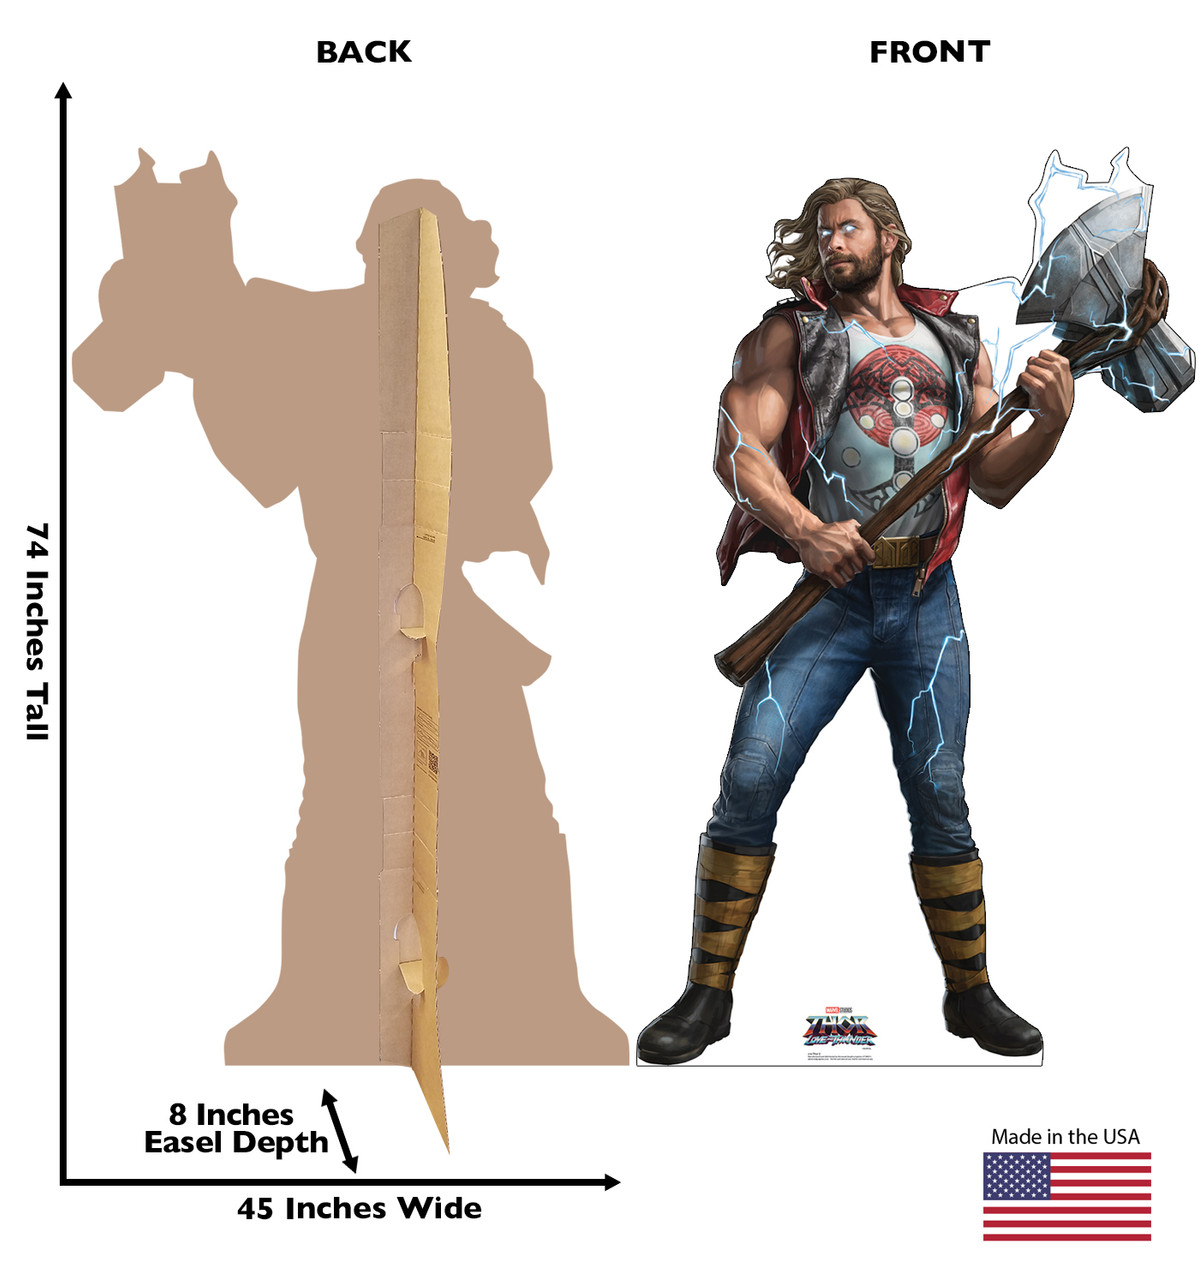 Life-size cardboard standee of Thor 2 from Marvel's movie Thor Love and Thunder with back and front dimensions.